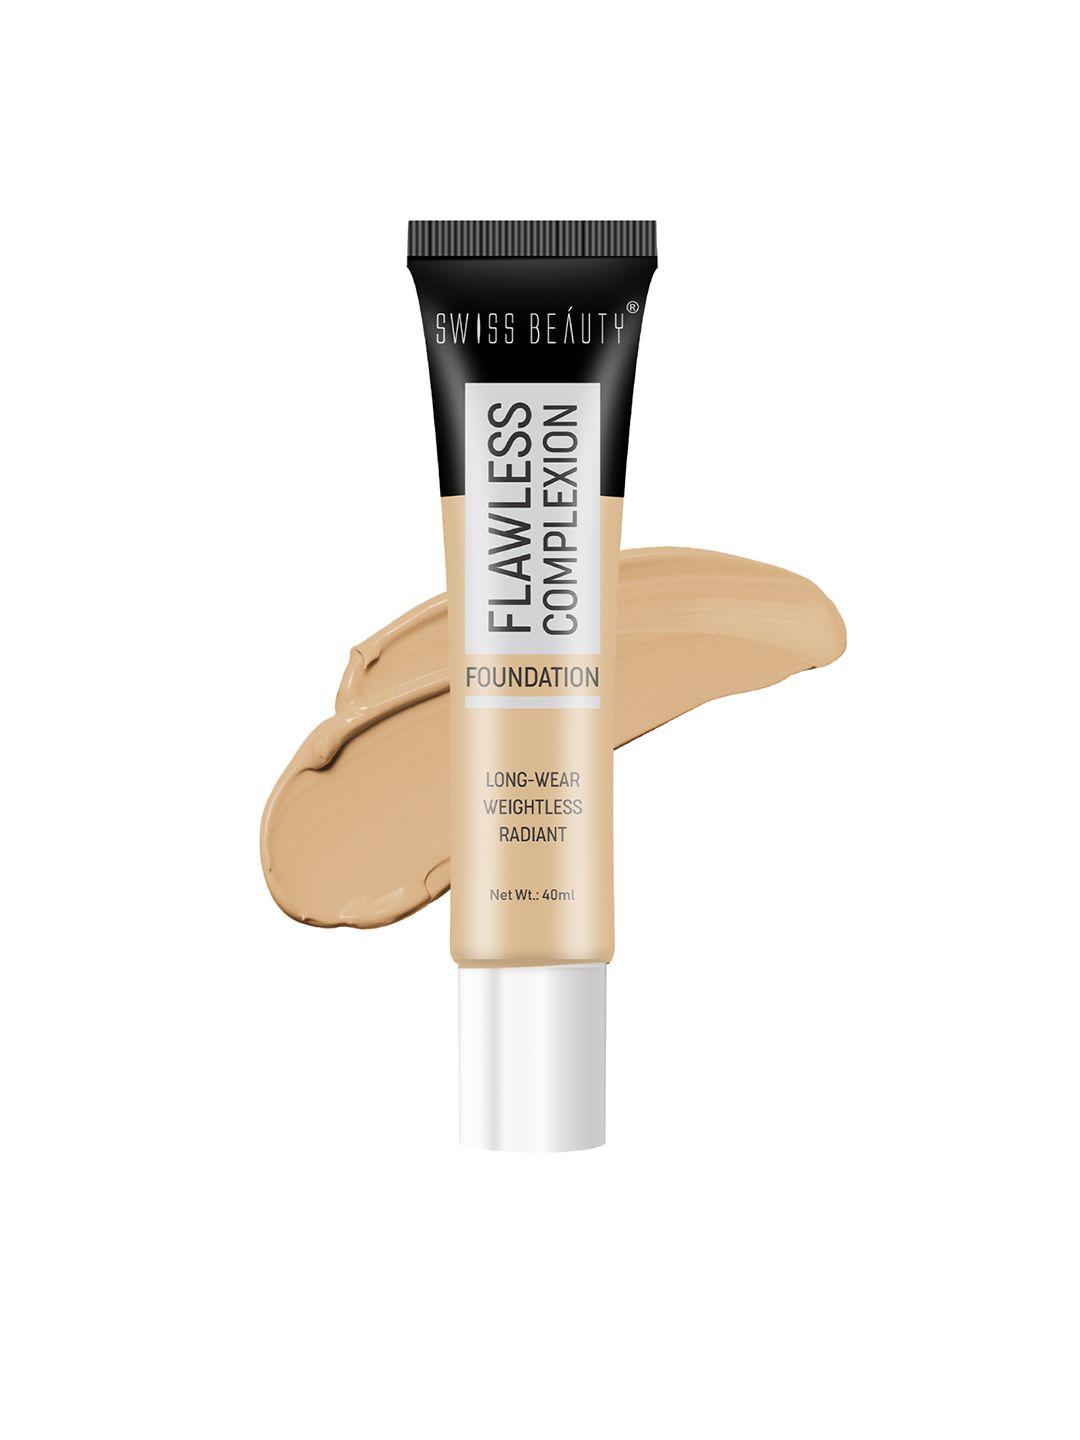 swiss beauty flawless complexion foundation - medium pale